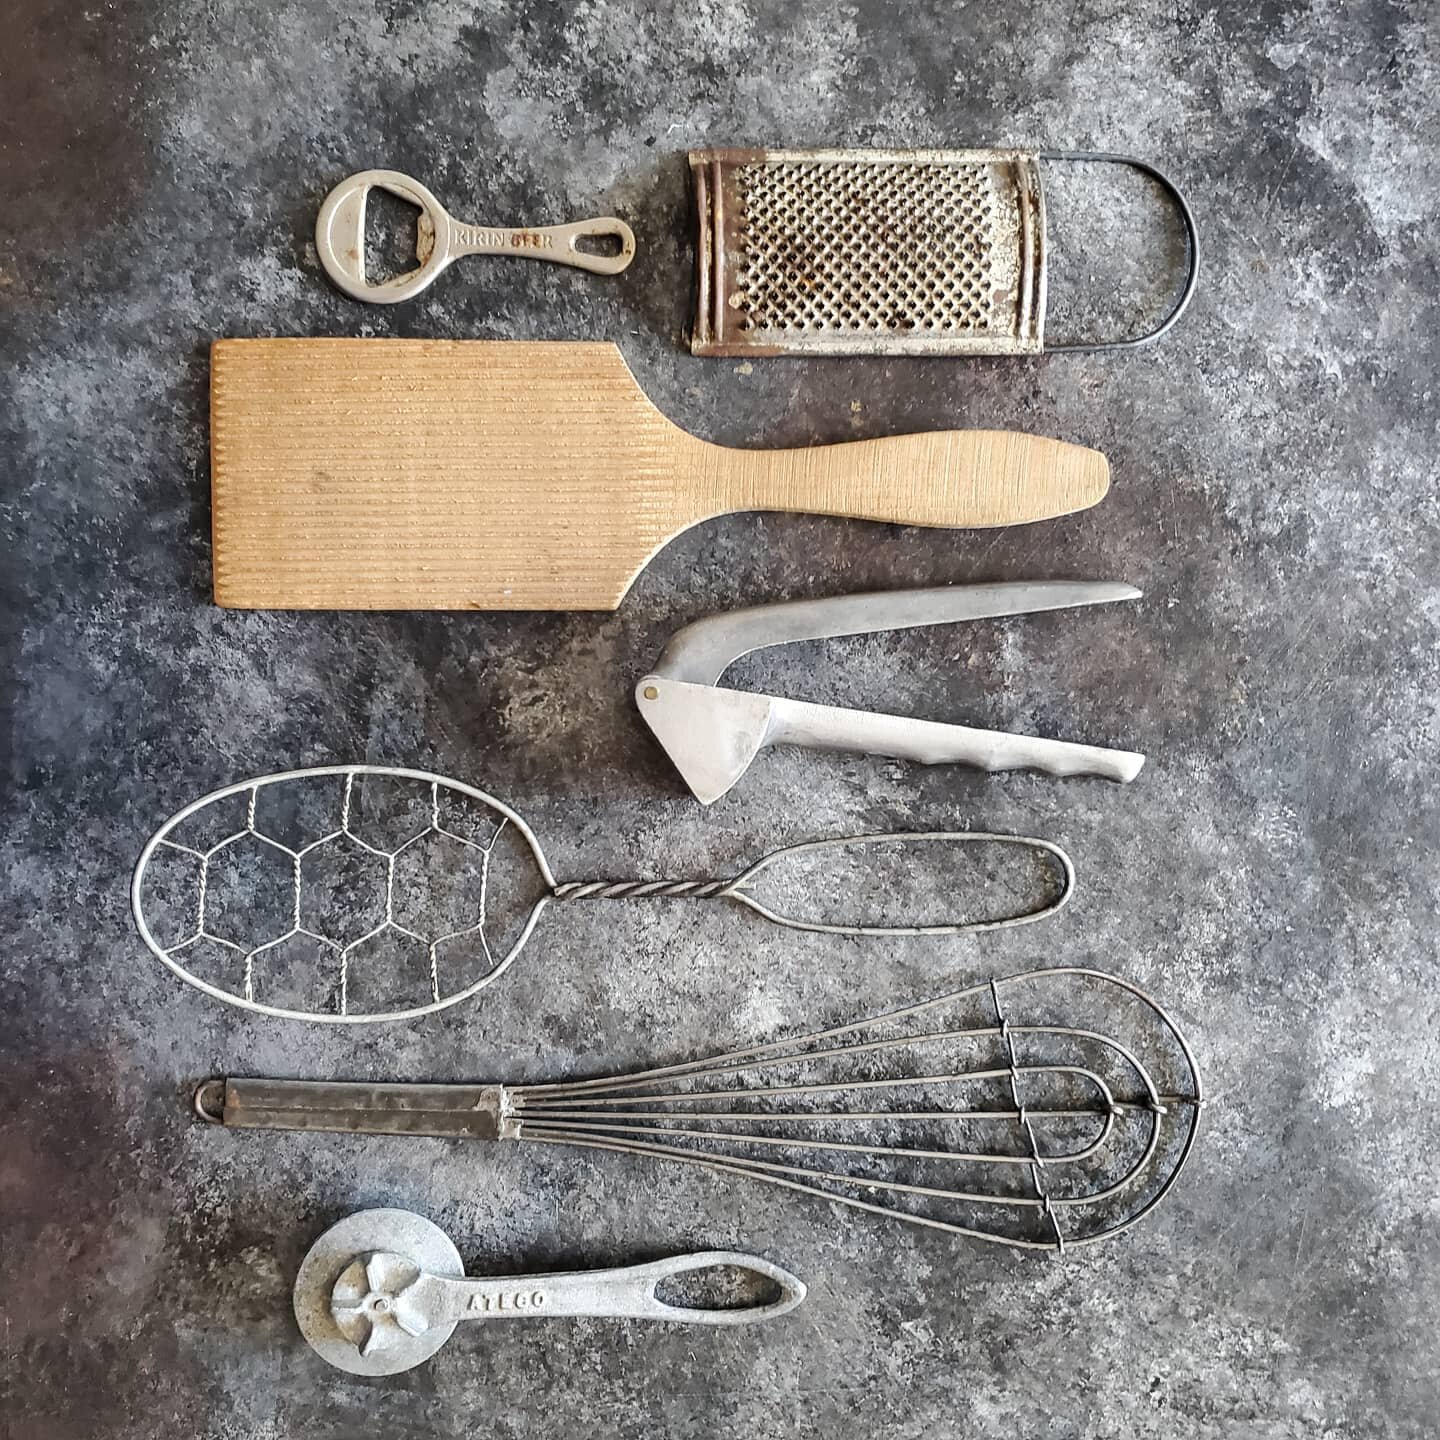 I have a drawer full of vintage kitchen tools. You could say that I'm obsessed. They are the number 1 thing that I look for in my thrift shopping adventures. It all connects back to the few things that were in our kitchen drawer, the garlic press, th